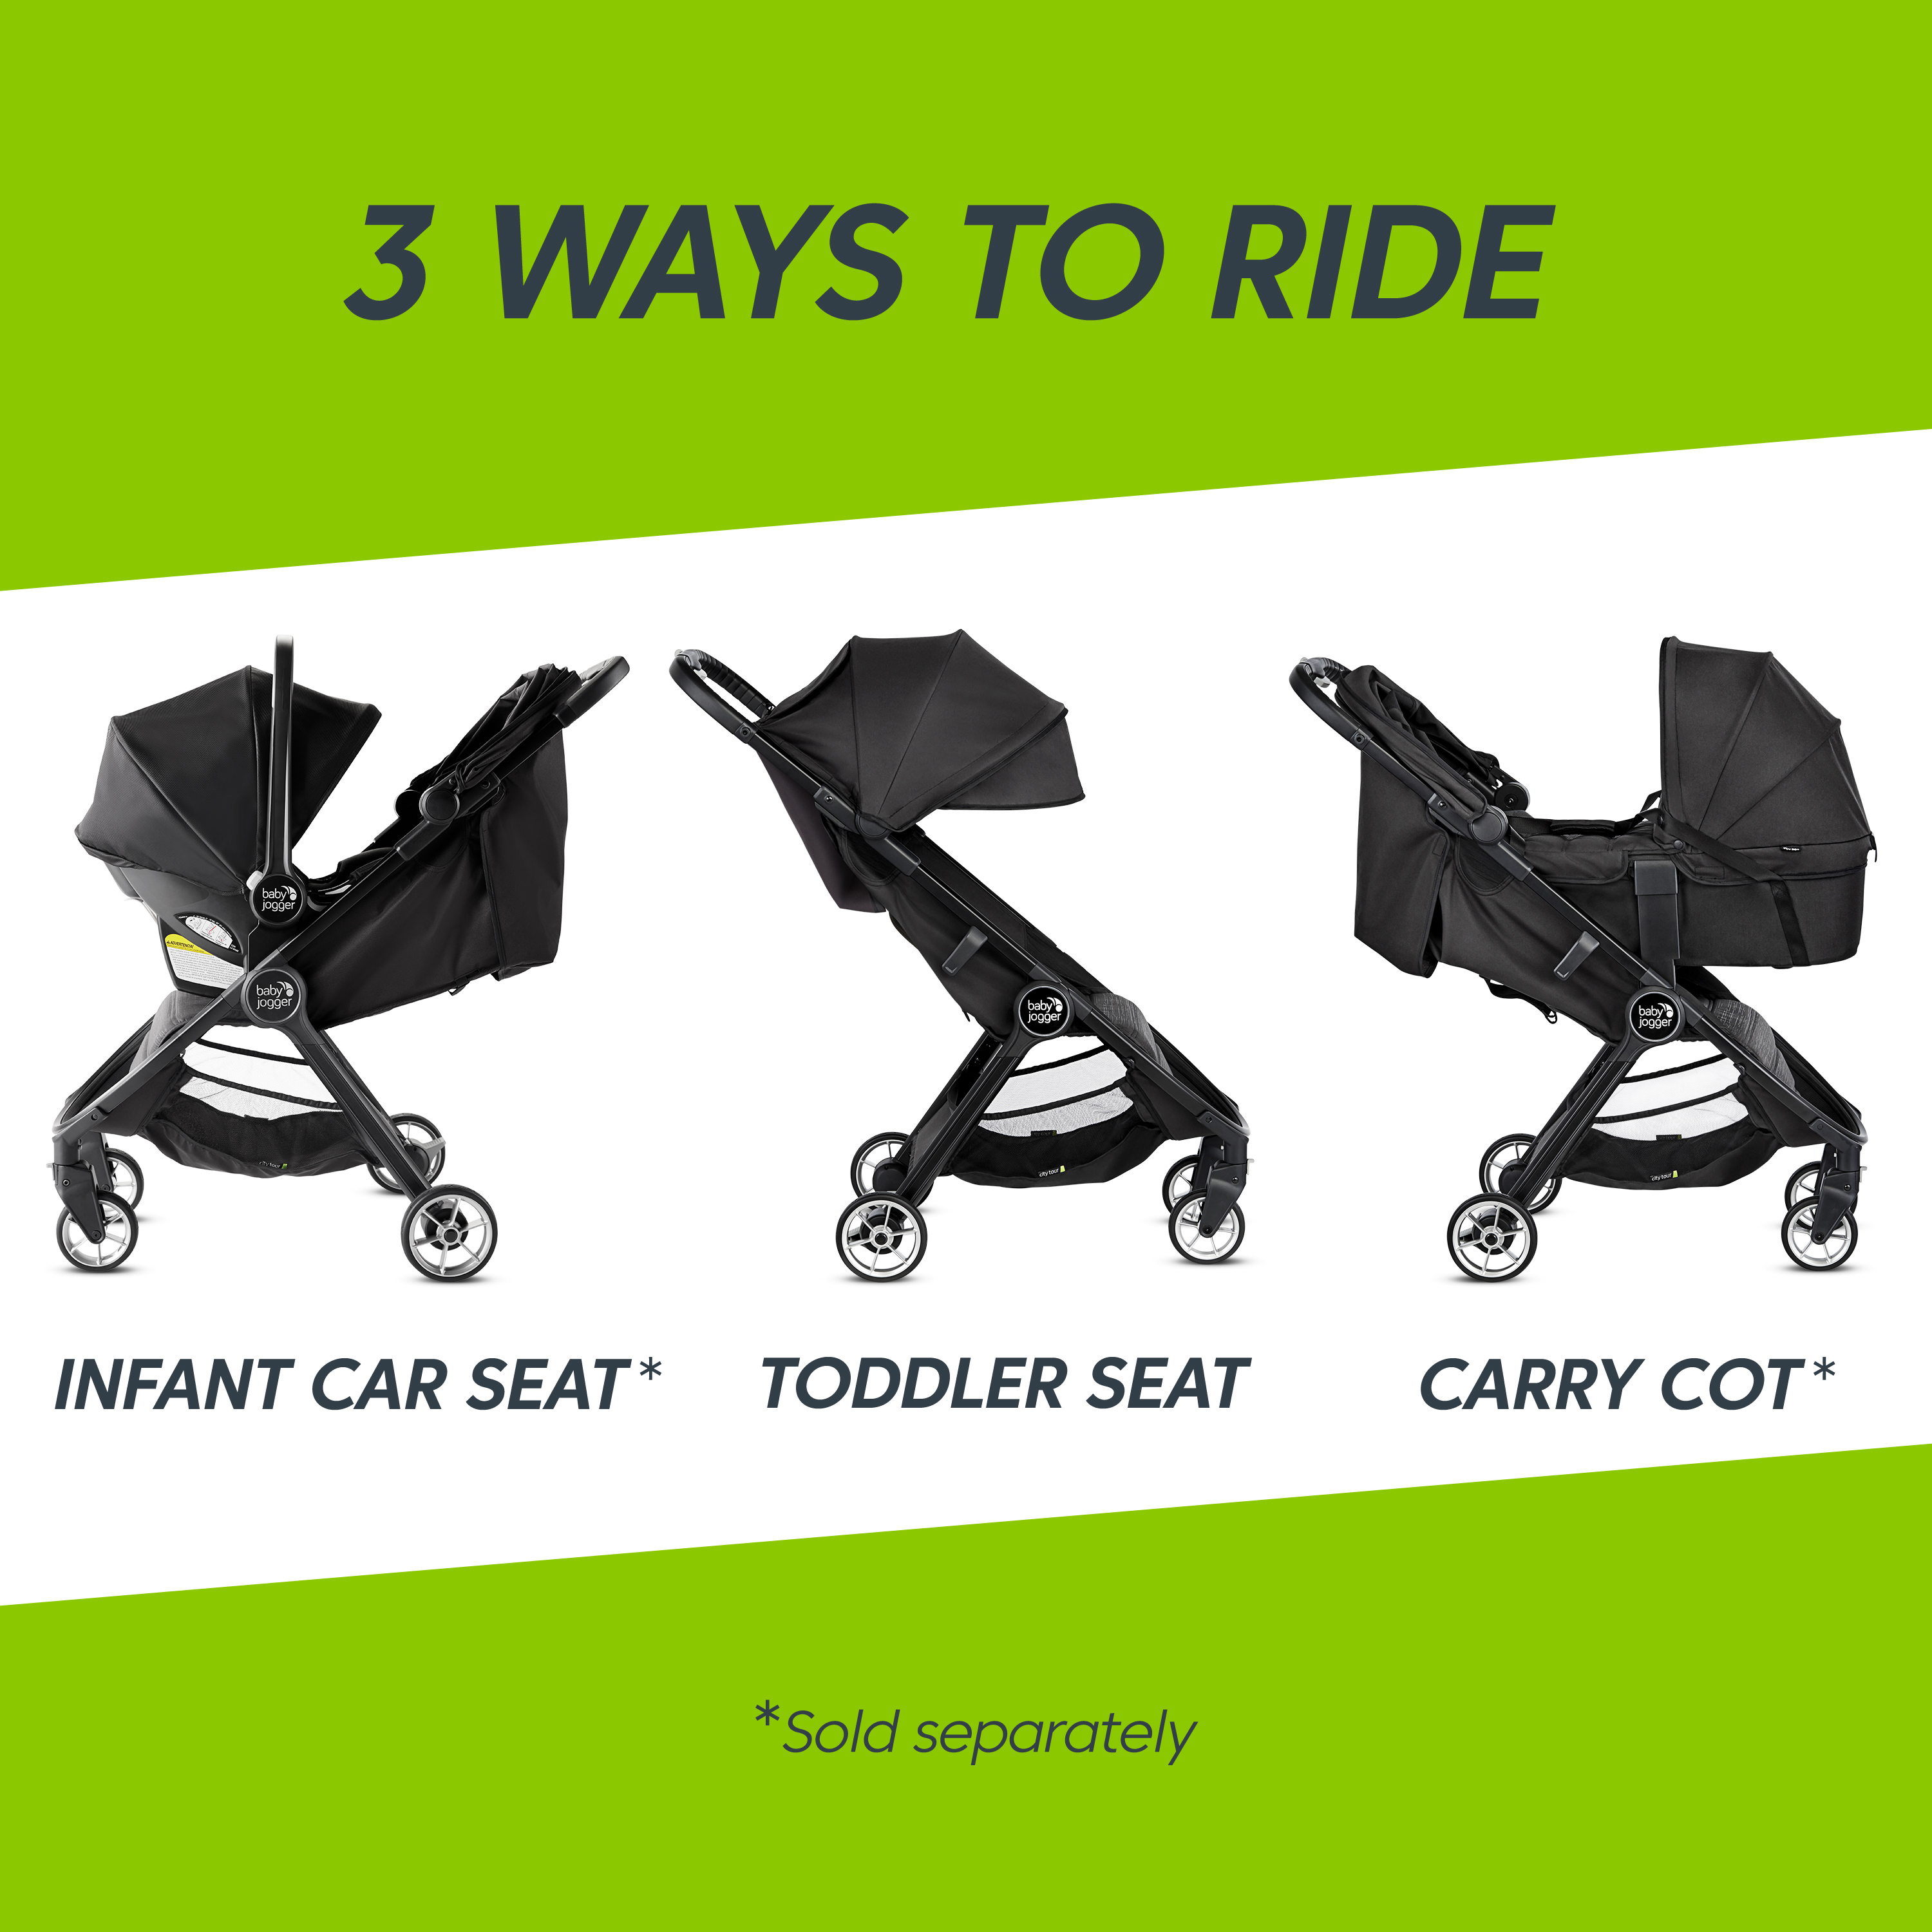 Baby Jogger City Tour 2 Lightweight Ultra Compact Folding Travel Stroller, Gray - image 4 of 10